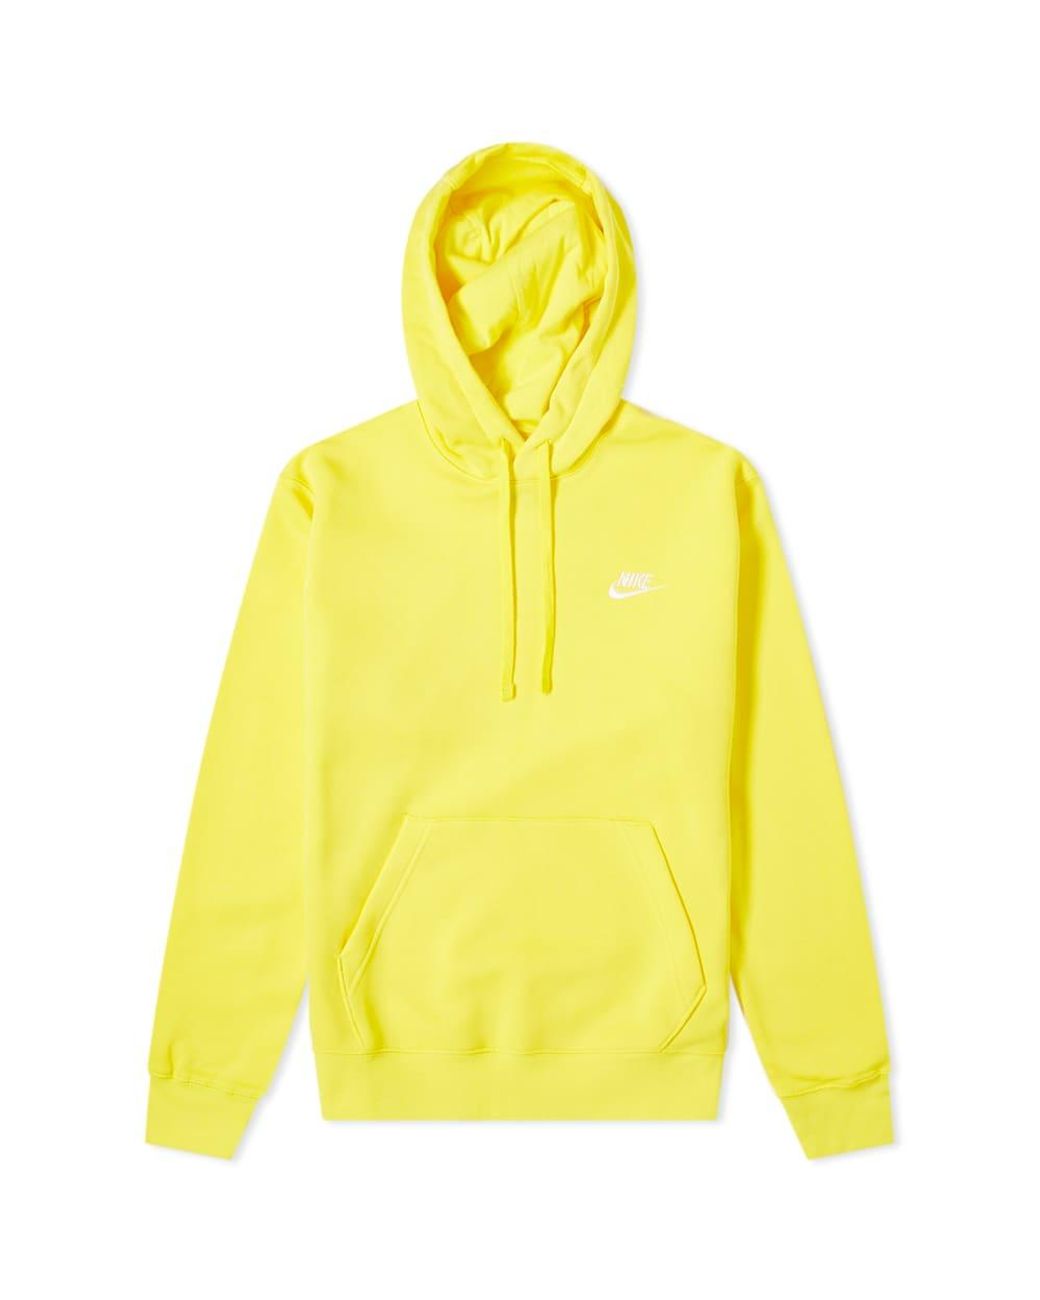 Nike Club Pullover Hoody in Yellow for Men - Lyst